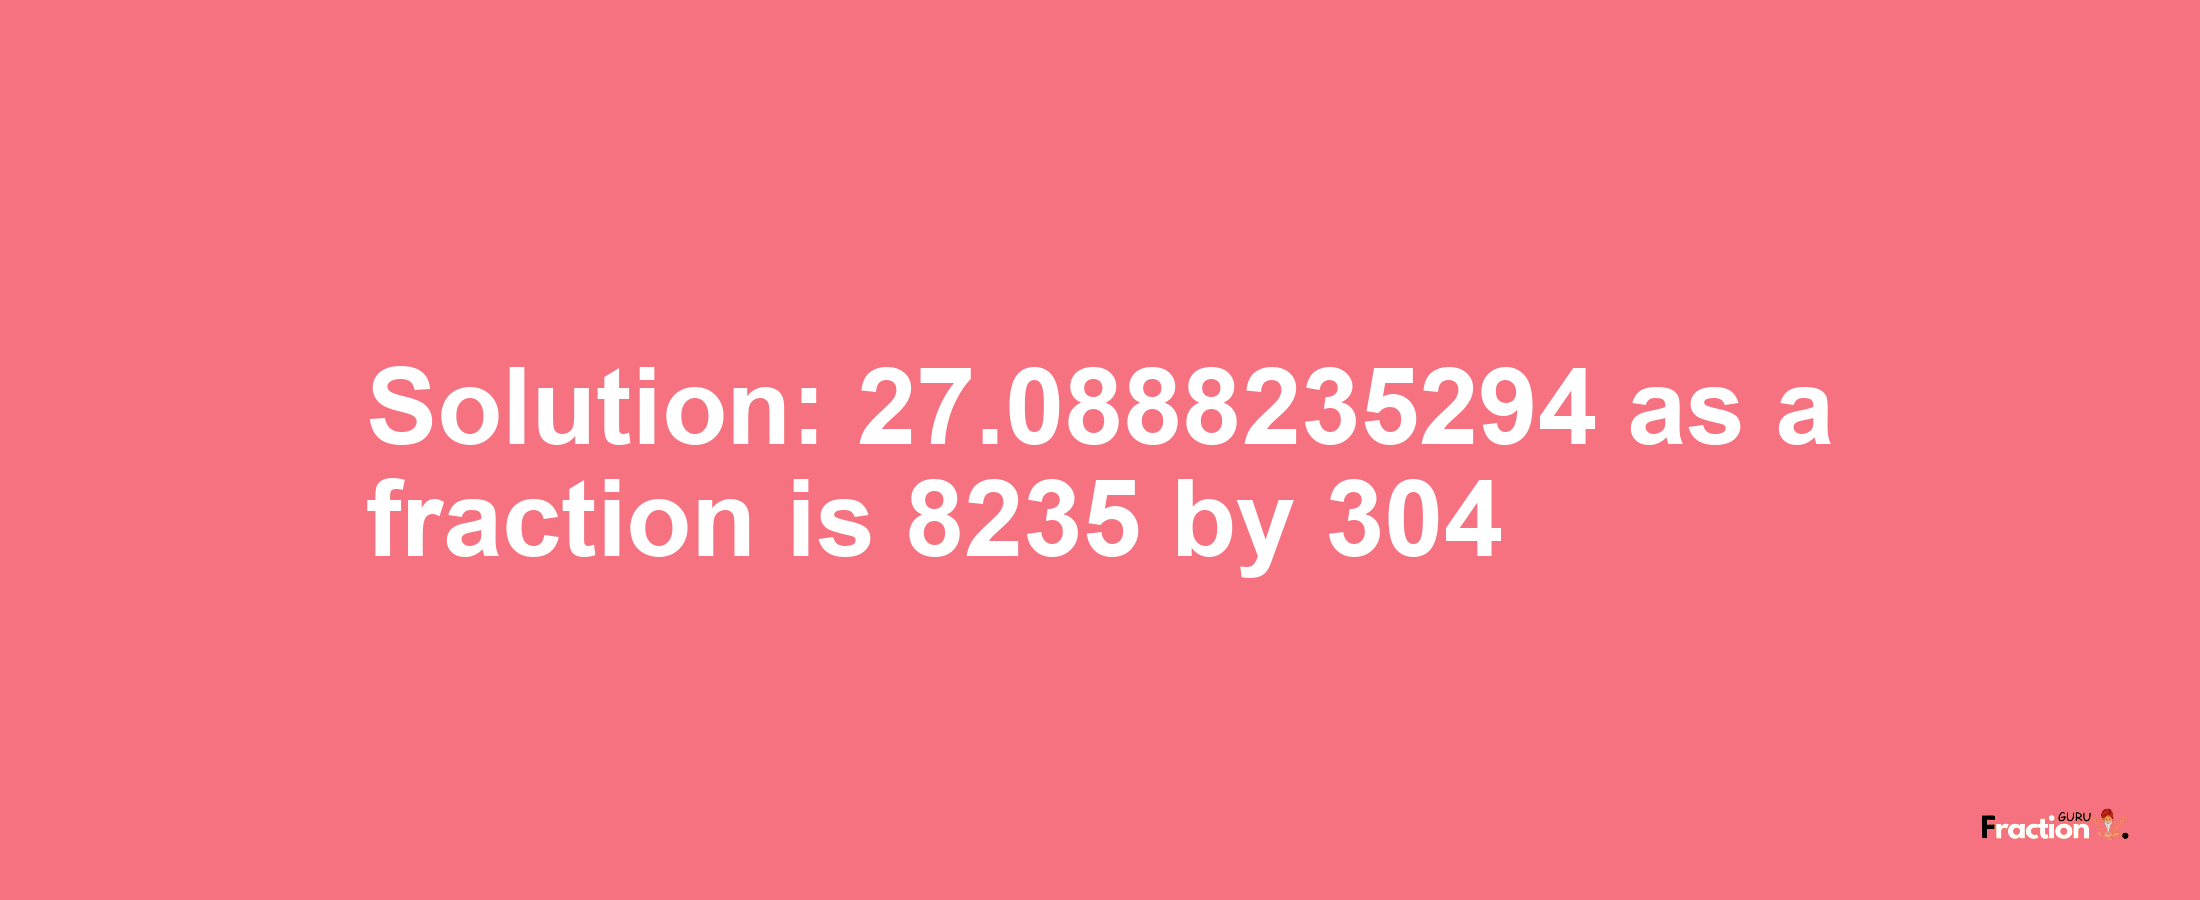 Solution:27.0888235294 as a fraction is 8235/304